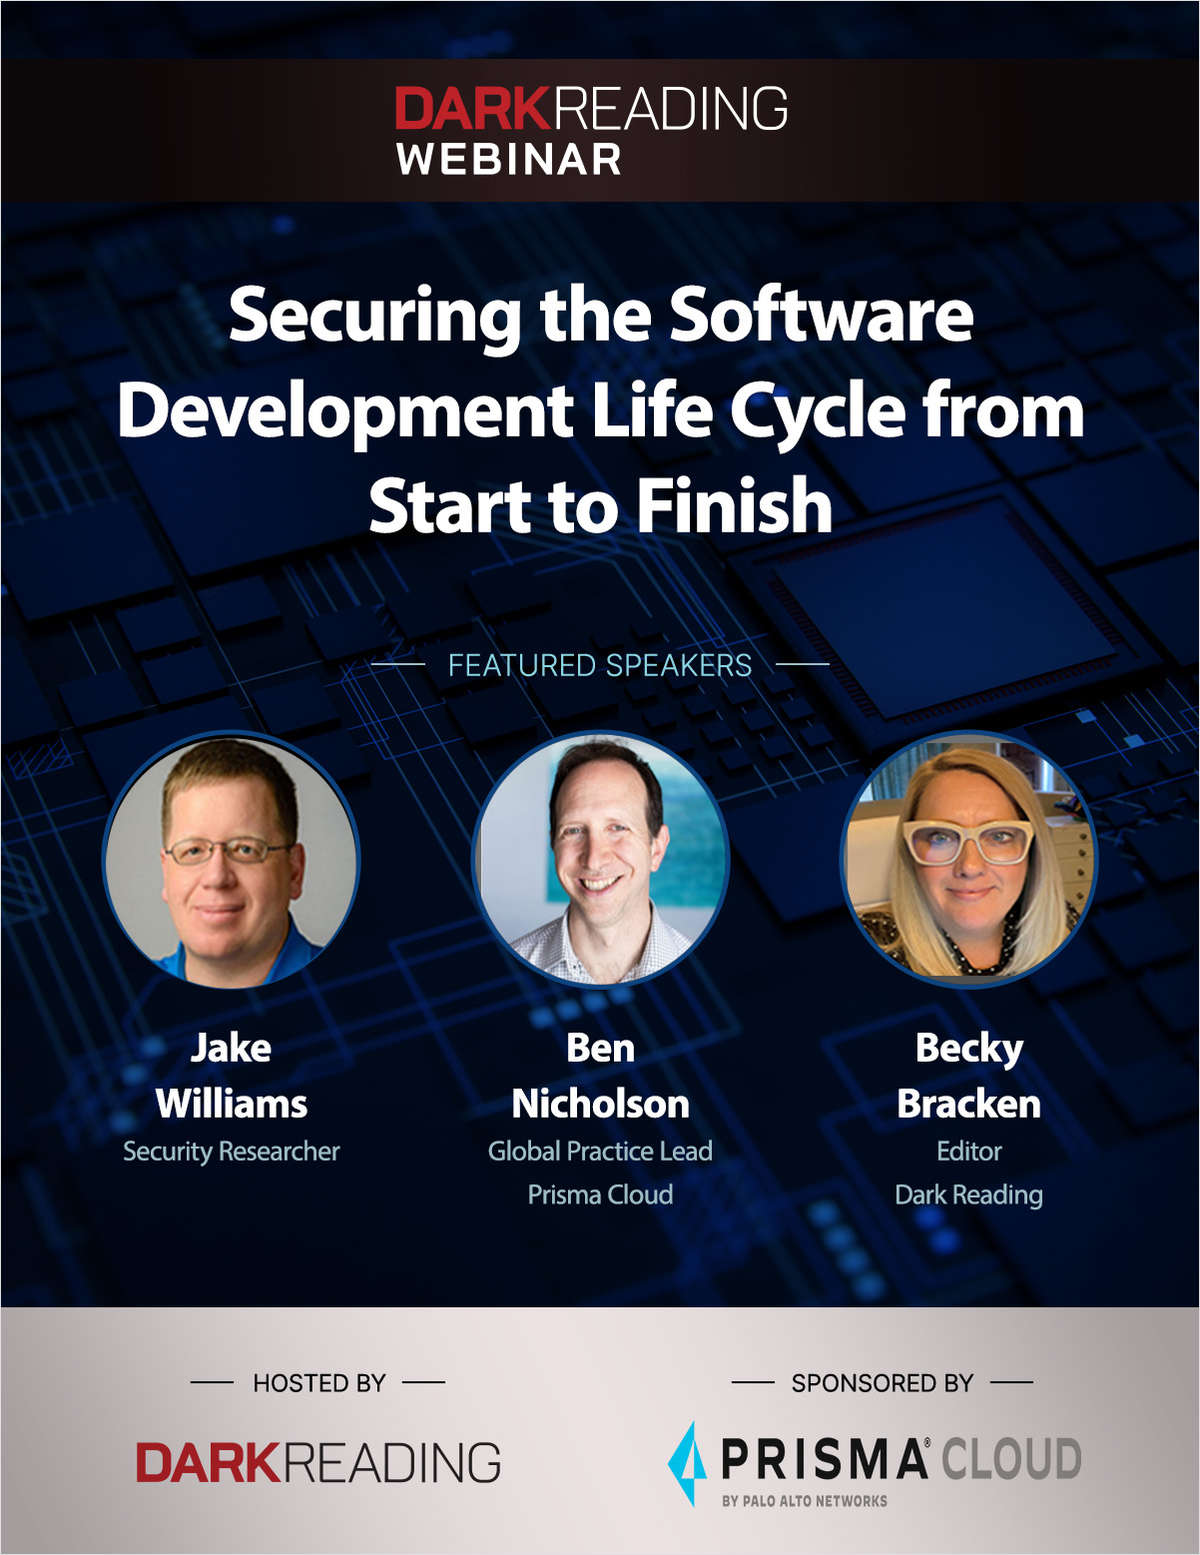 Securing the Software Development Life Cycle from Start to Finish